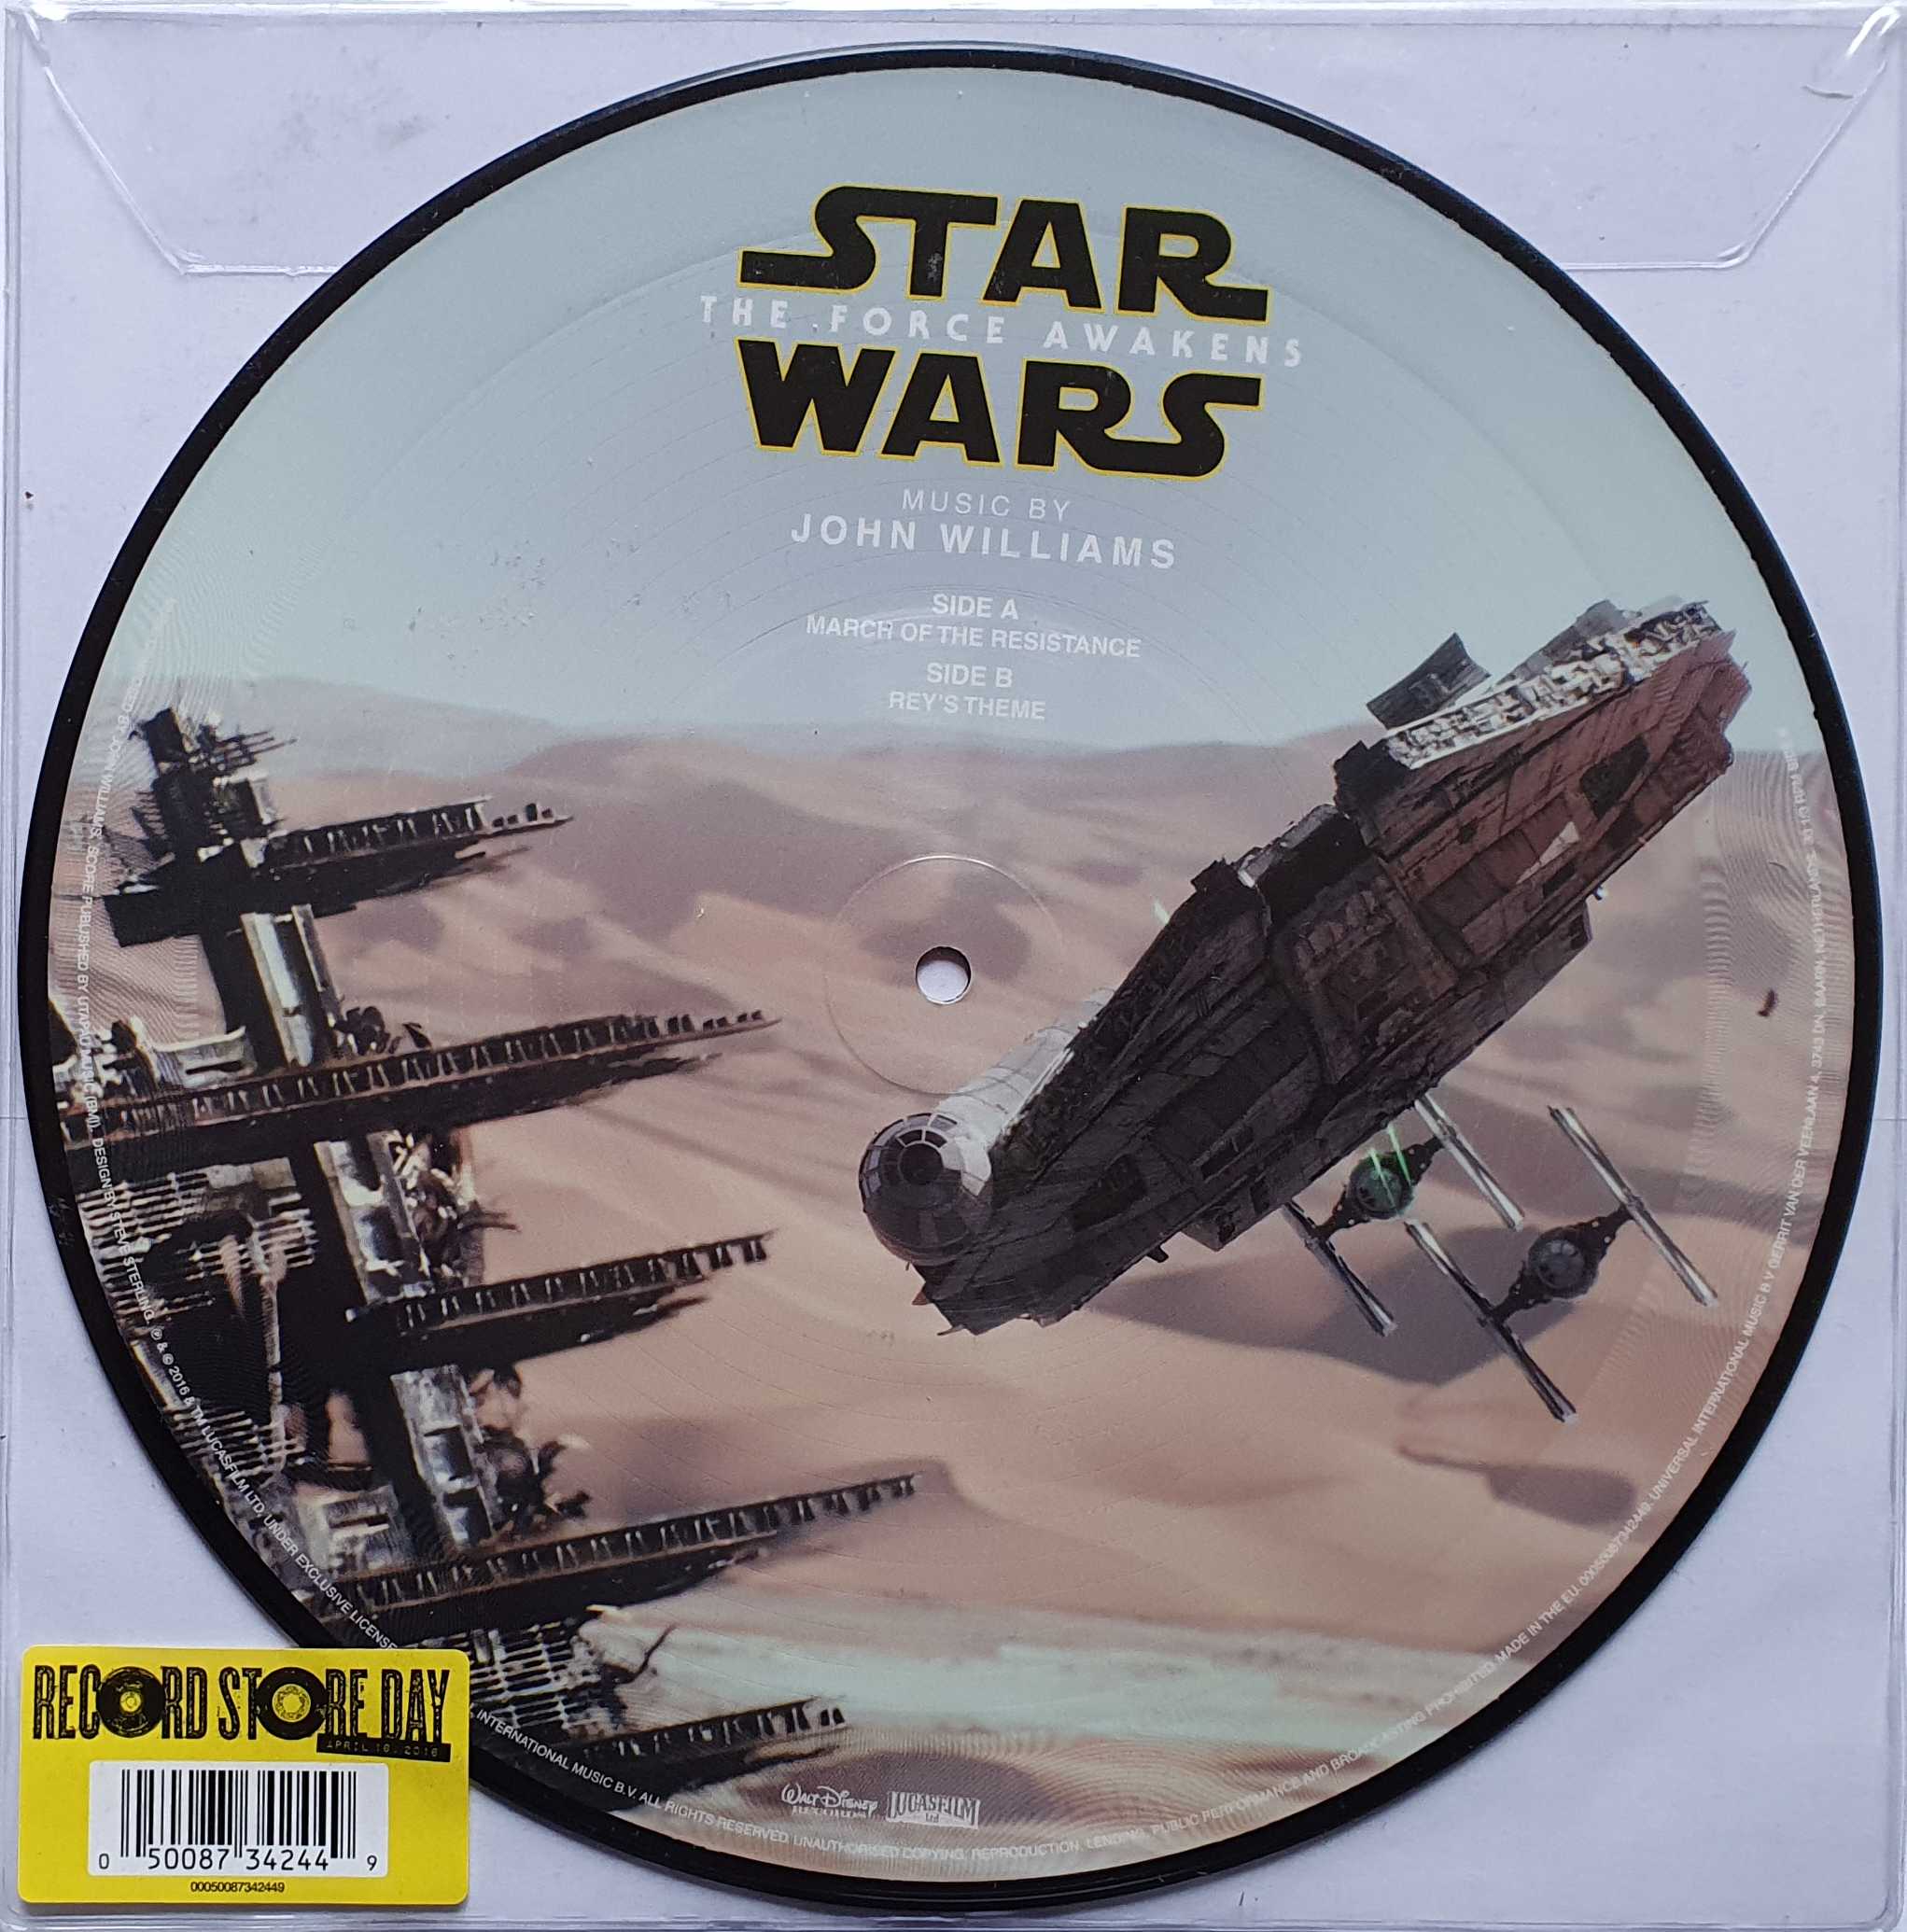 Picture of 00050087342449 Star Wars: The Force Awakens - Limited edition RSD 2016 by artist John Williams 